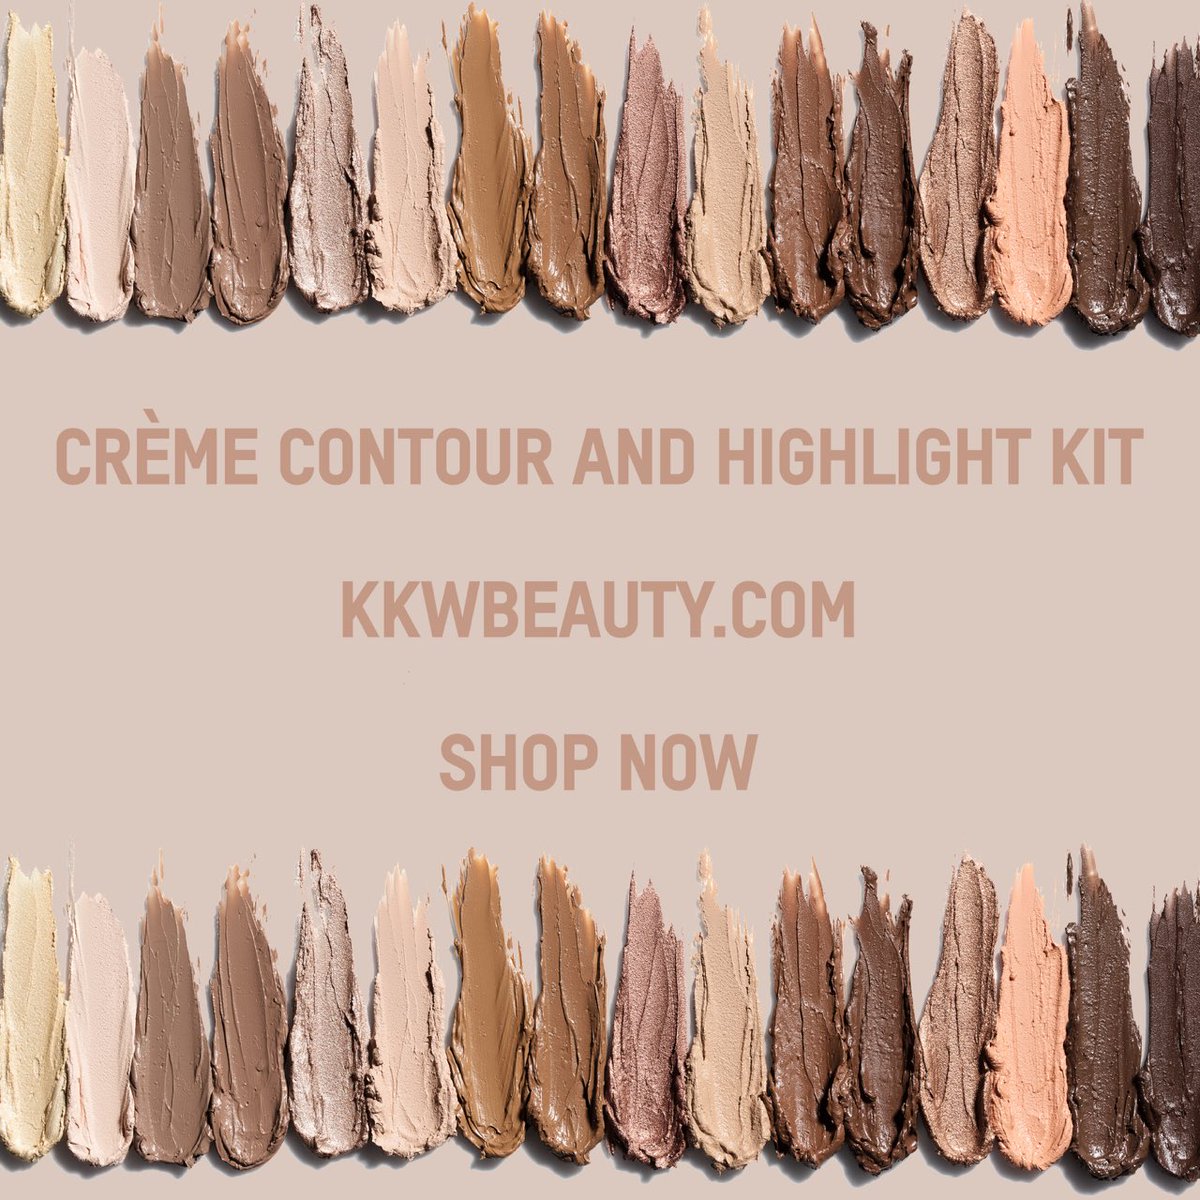 Crème Contour & Highlighter Kits are back in stock now on https://t.co/aIjp1MBlpZ https://t.co/lYrjYO105V